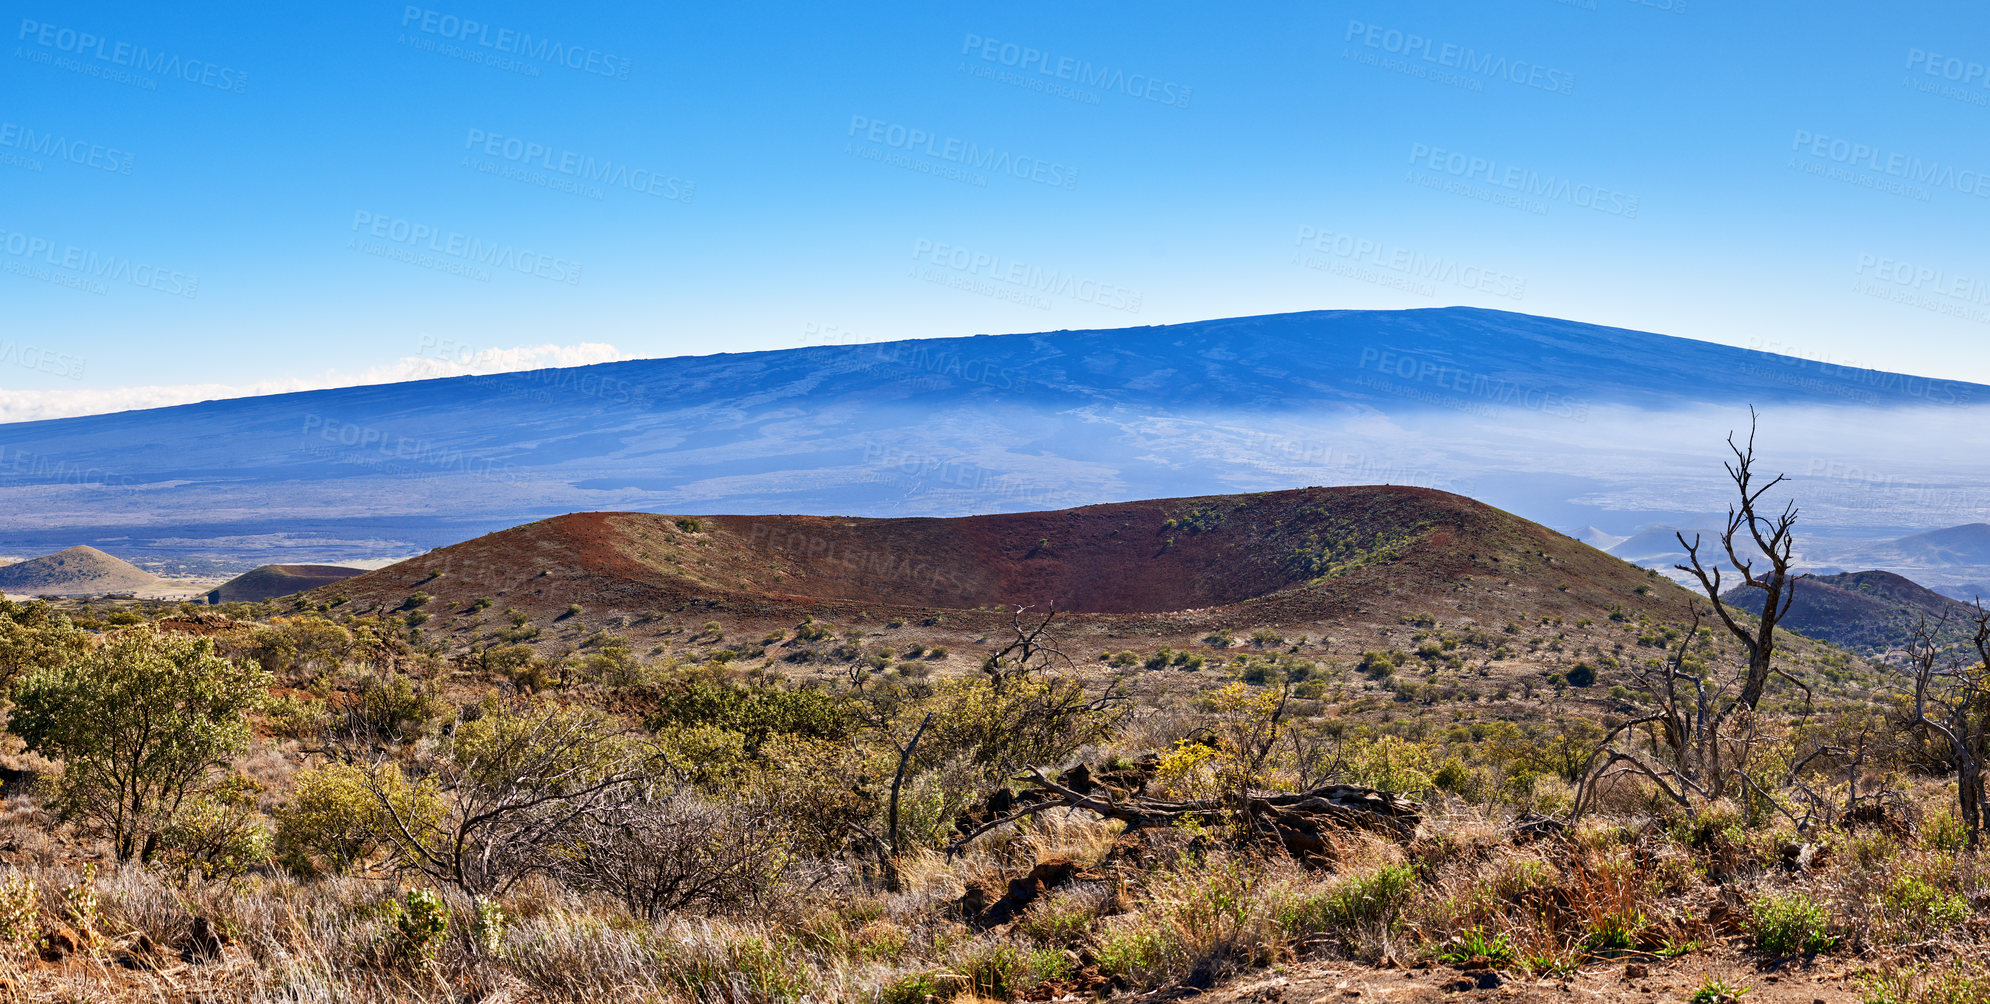 Buy stock photo Landscape of dry land and blue sky with copy space. A dormant volcano in an open uncultivated location. Nature scenery of bushy vegetation on mountain summit of a volcanic land in Big Island, Hawaii